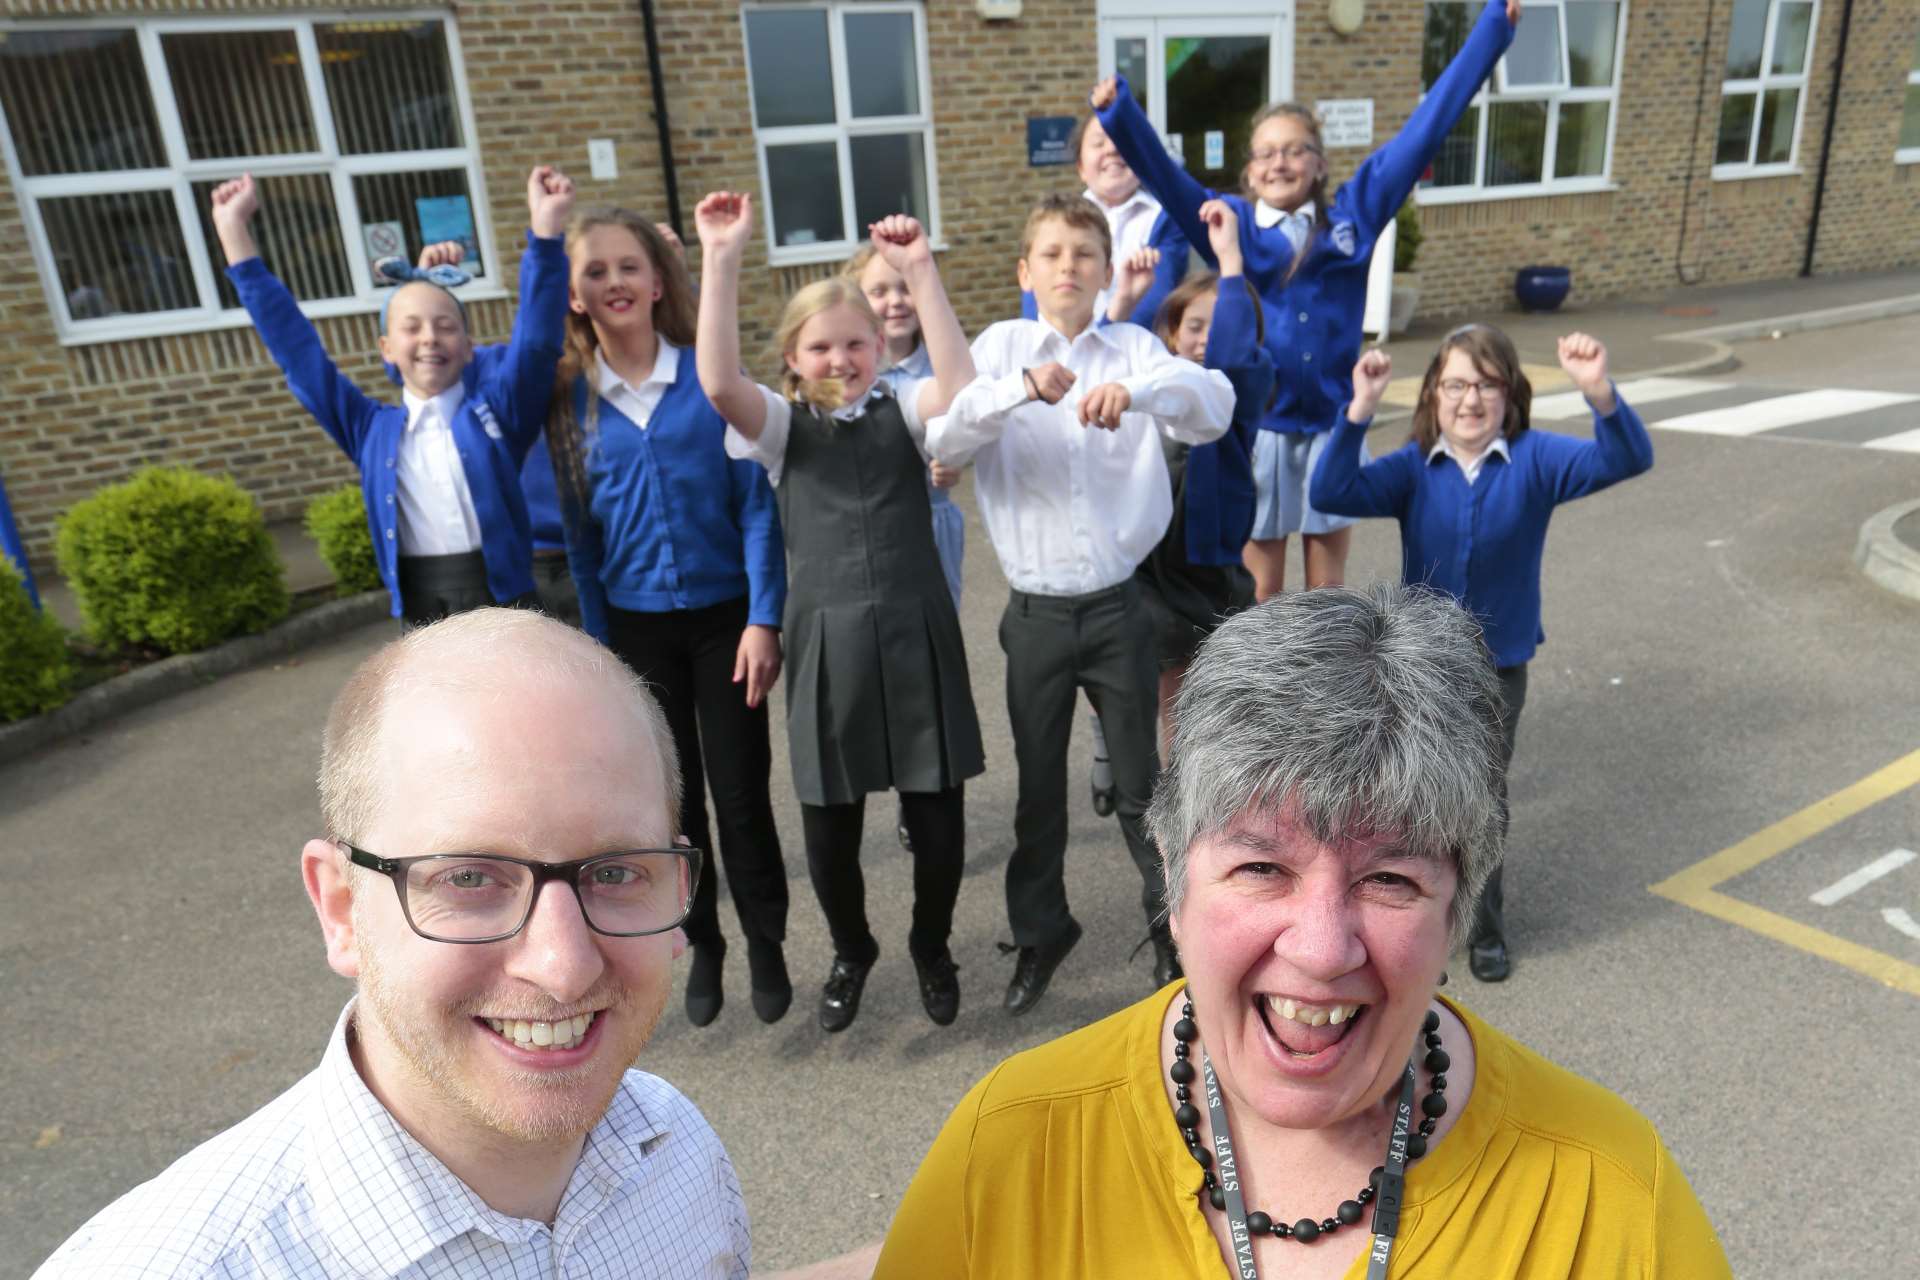 Acting head of school Simon Karfft and executive head Cathy Walker were left delighted at the Ofsted inspection